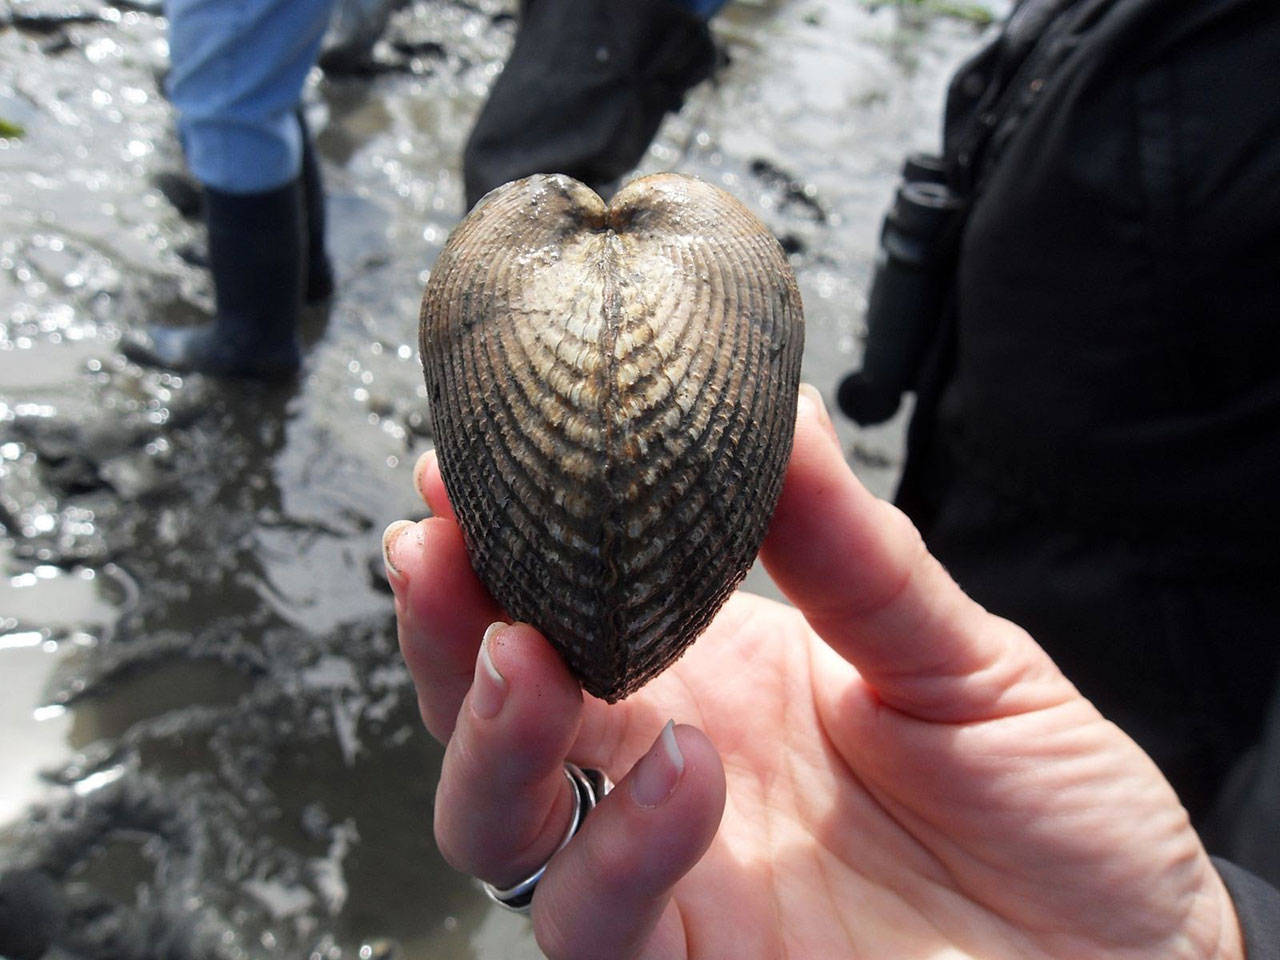 Side view of heart cockle clam.